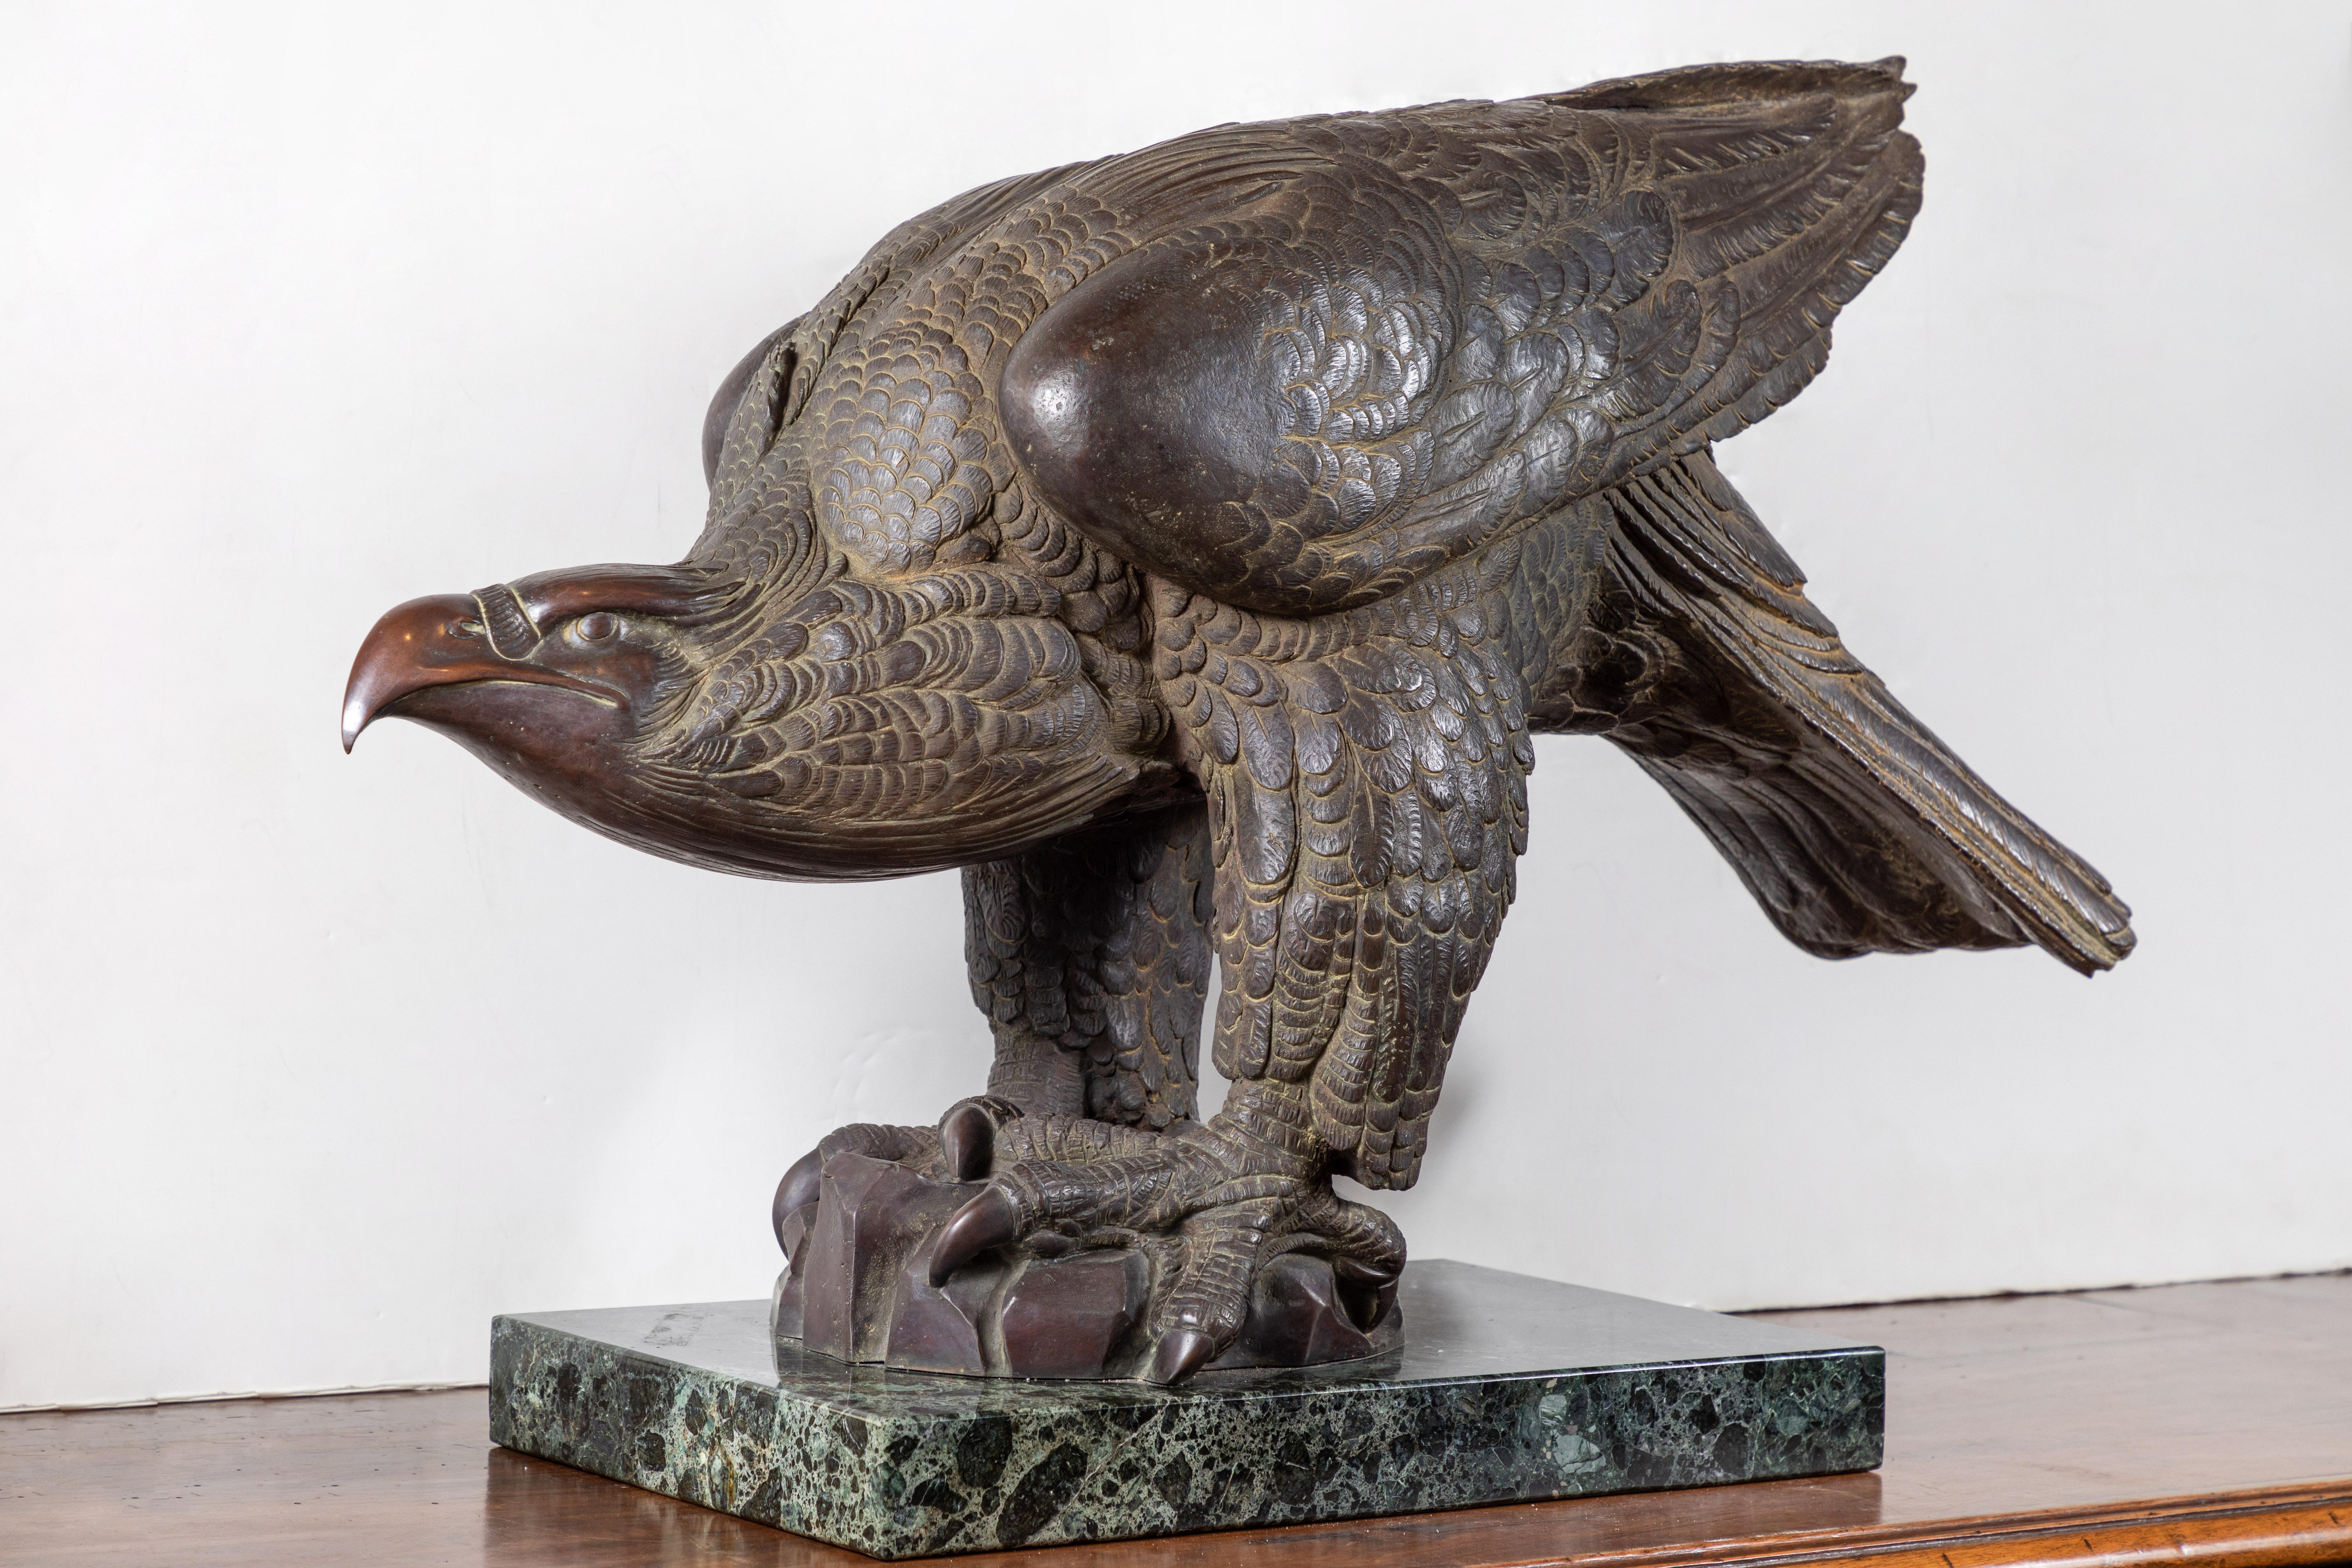 Fabulous, 1920s, detailed, cast bronze falconfrom a lost wax cast by important Italian artist, Sirio Tofanari (1886-1969). Executed by the Fonderia Artistica Ferdinando Marinelli in Florence.

Tofanari is recognized as one of the foremost sculptors